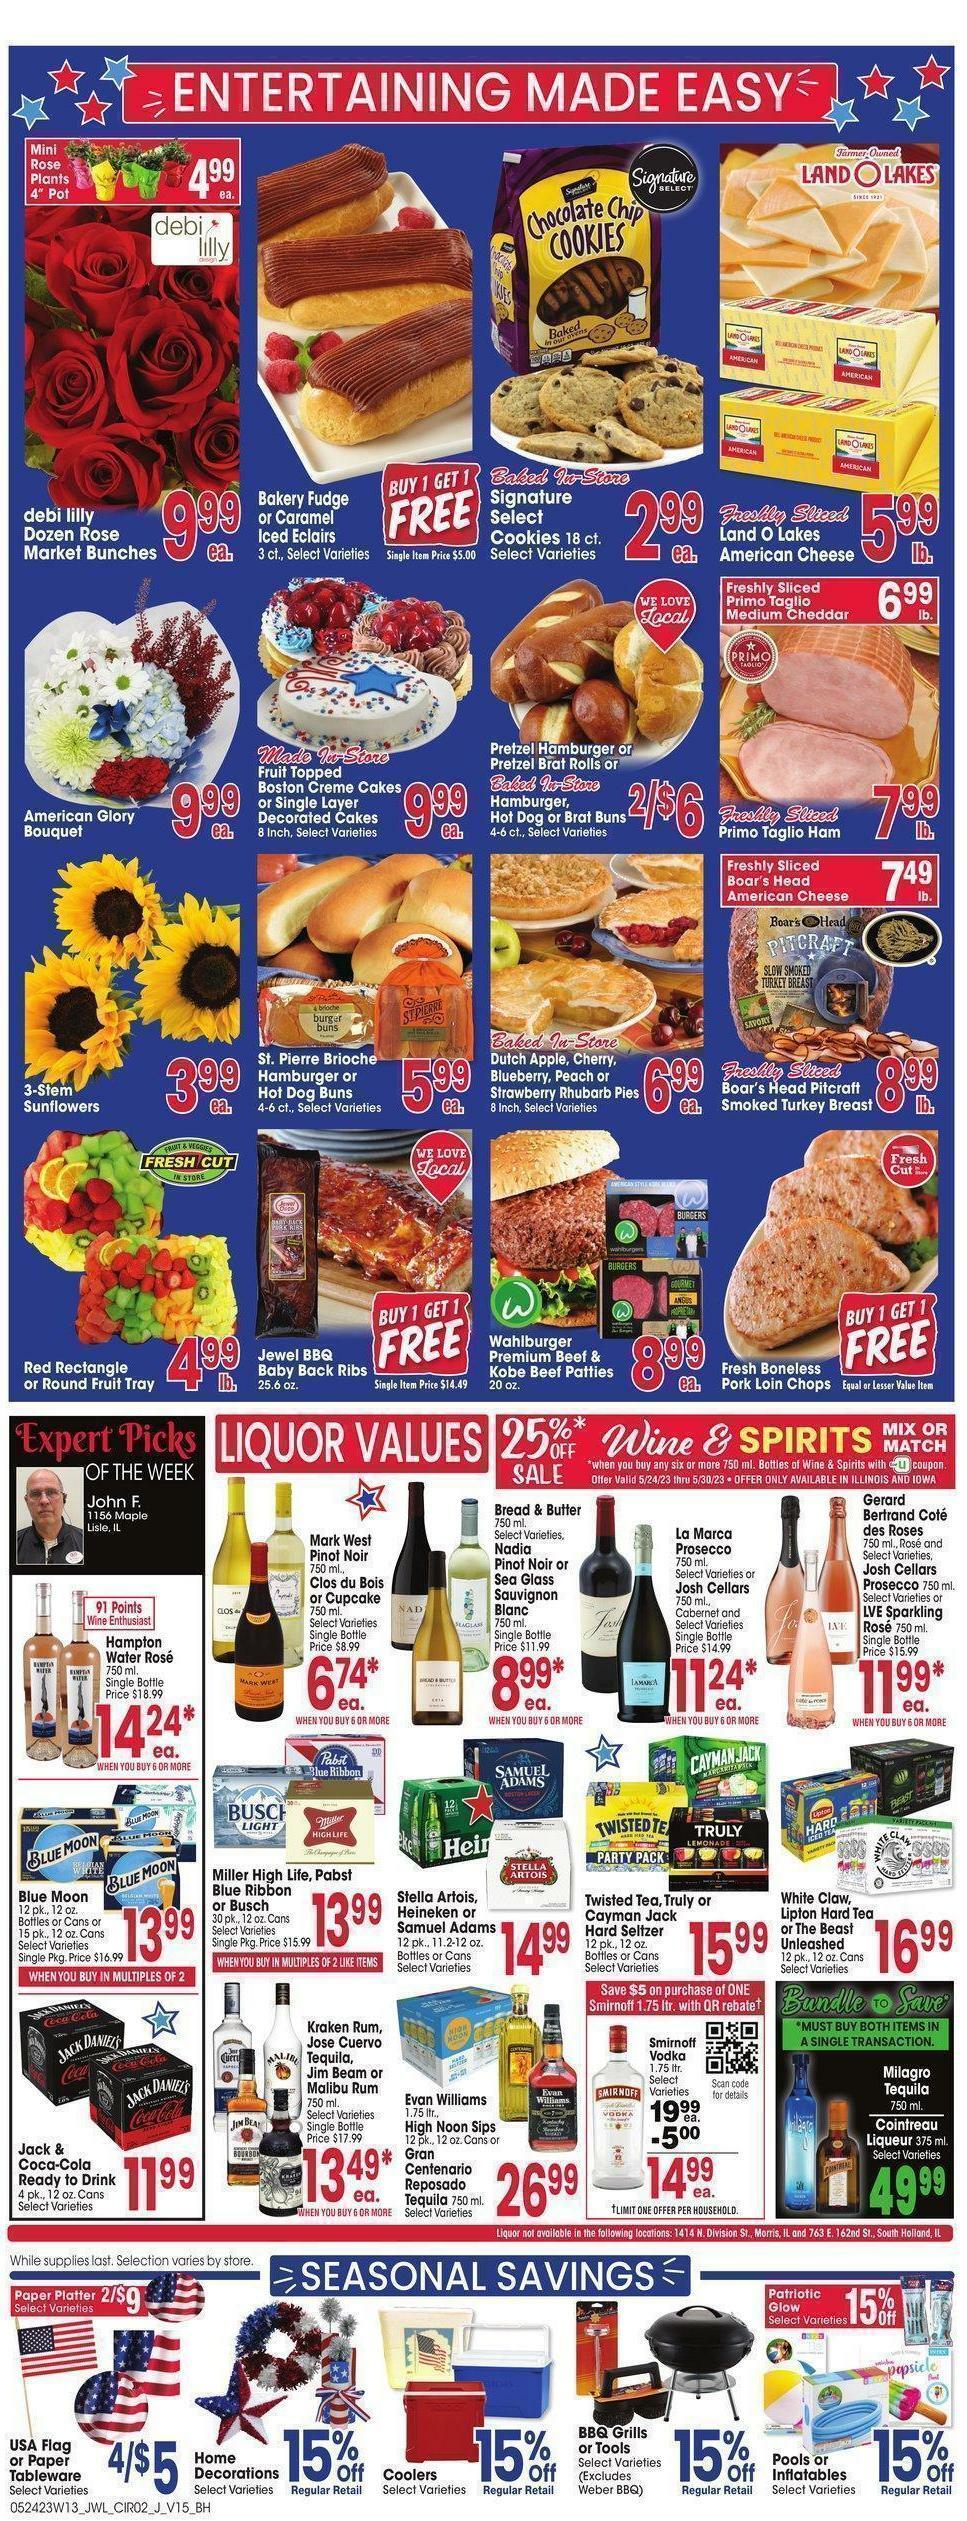 Jewel Osco Weekly Ad from May 24